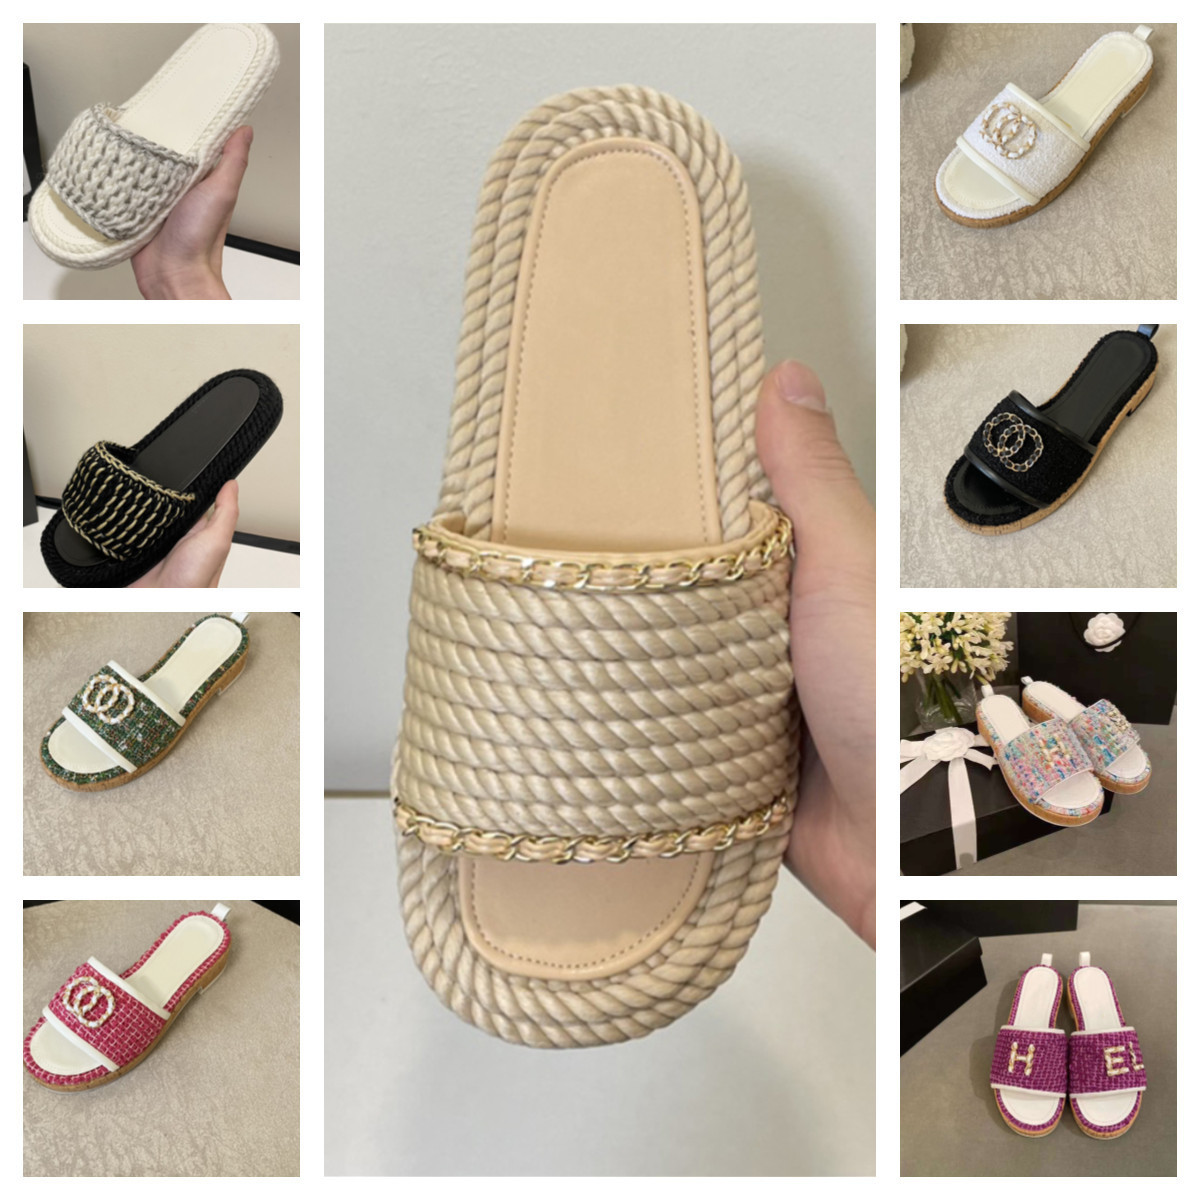 

Designer Women Slippers weave braided C Sandals Fashion Woolen Weaving casual Shoe Chain Knit Platform Slippers pool Slides Ladies Beach Flip Flops chan and EL, Other color;contact me